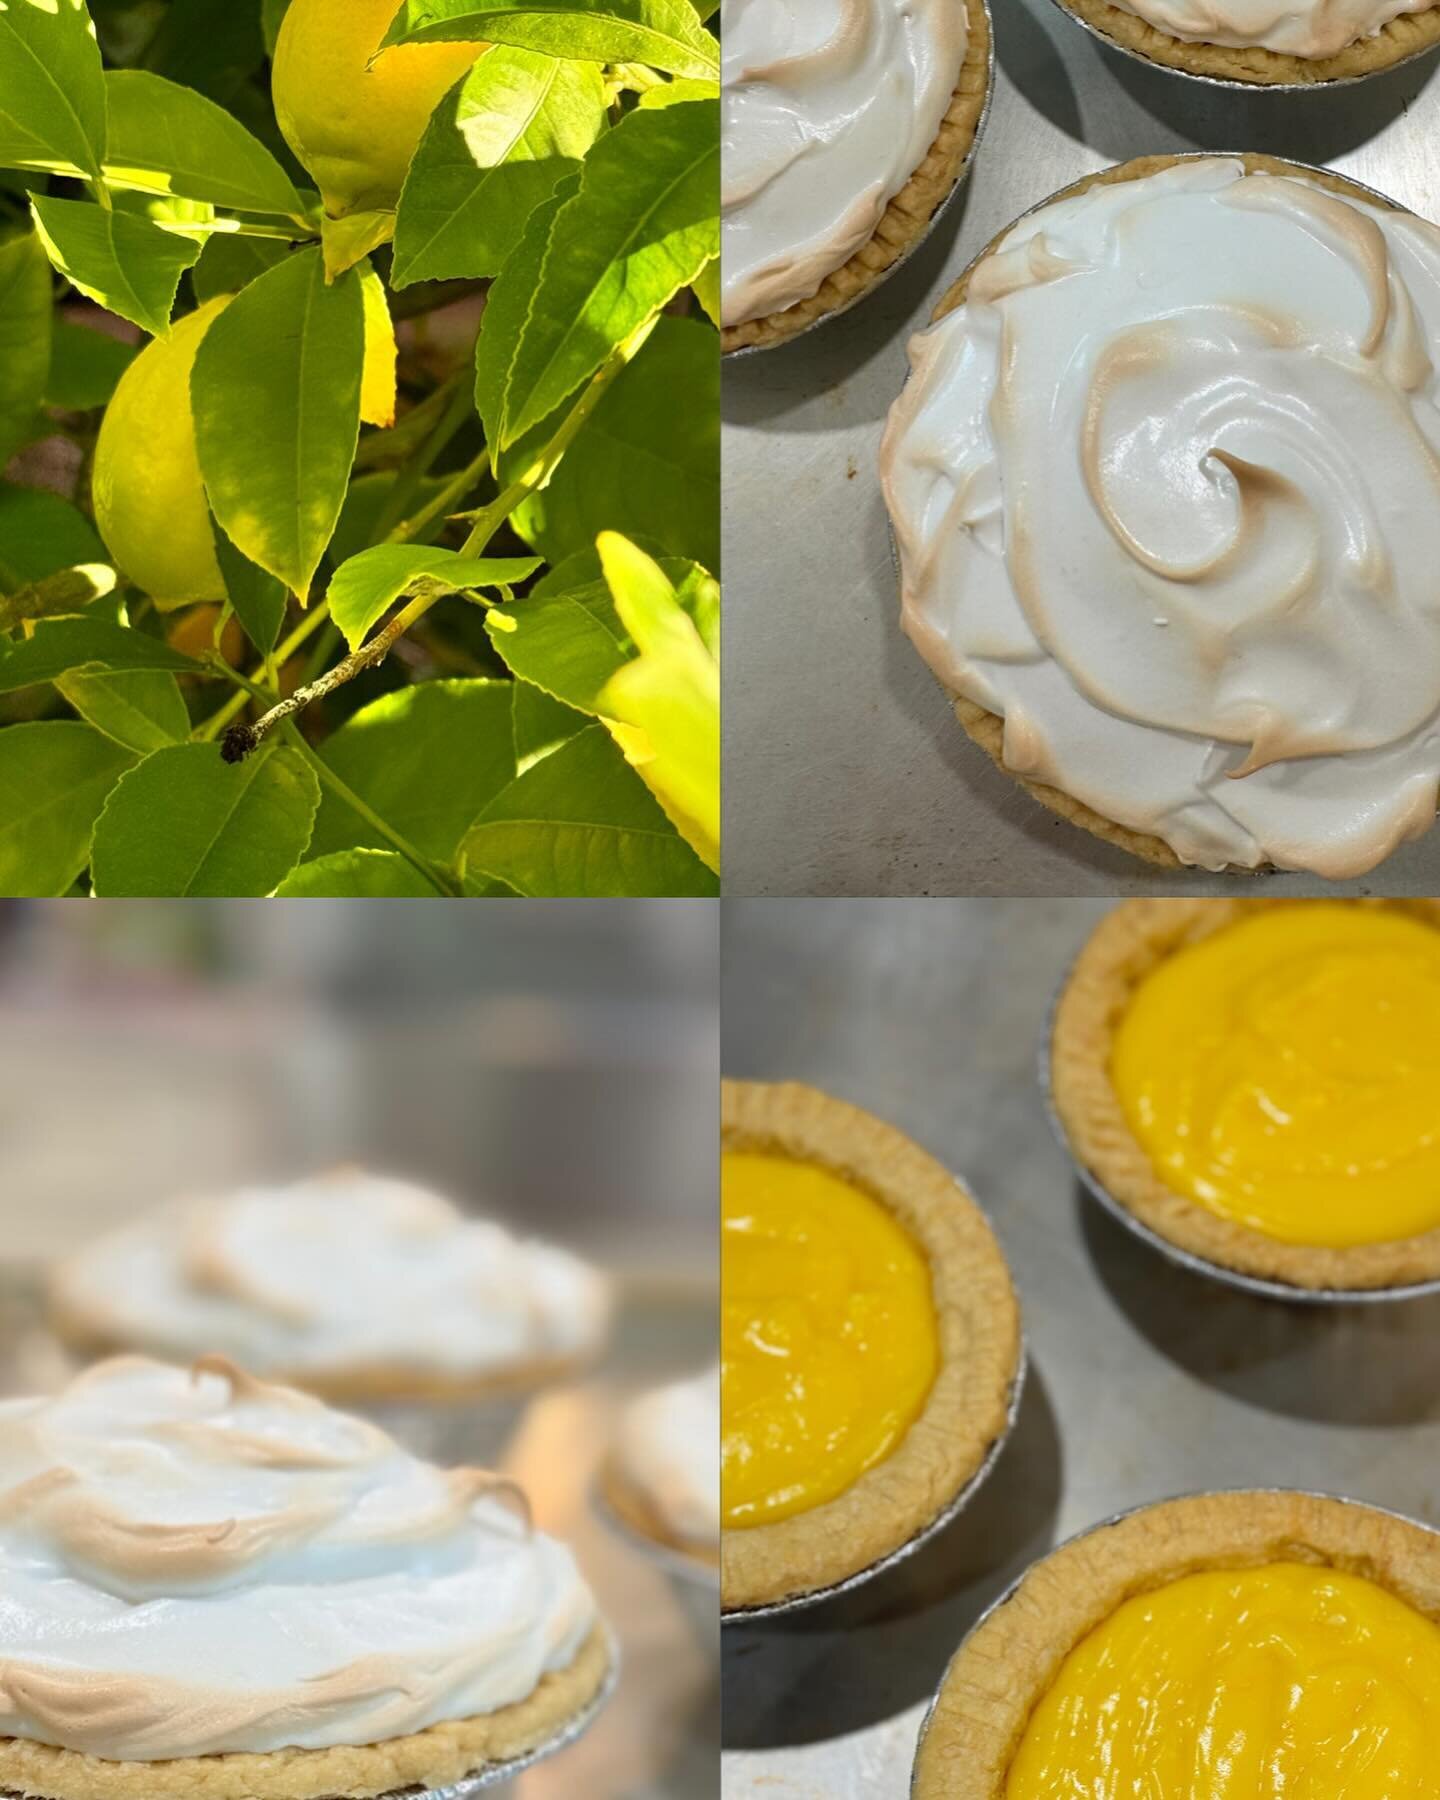 I love that nature gives us a ray of sunshine this time of year with beautiful lemons especially our Meyer lemon tree which makes the best lemon meringue pie - today @karl_the_store #lemonmerigue #meyerlemons #homemadepie #sausalito